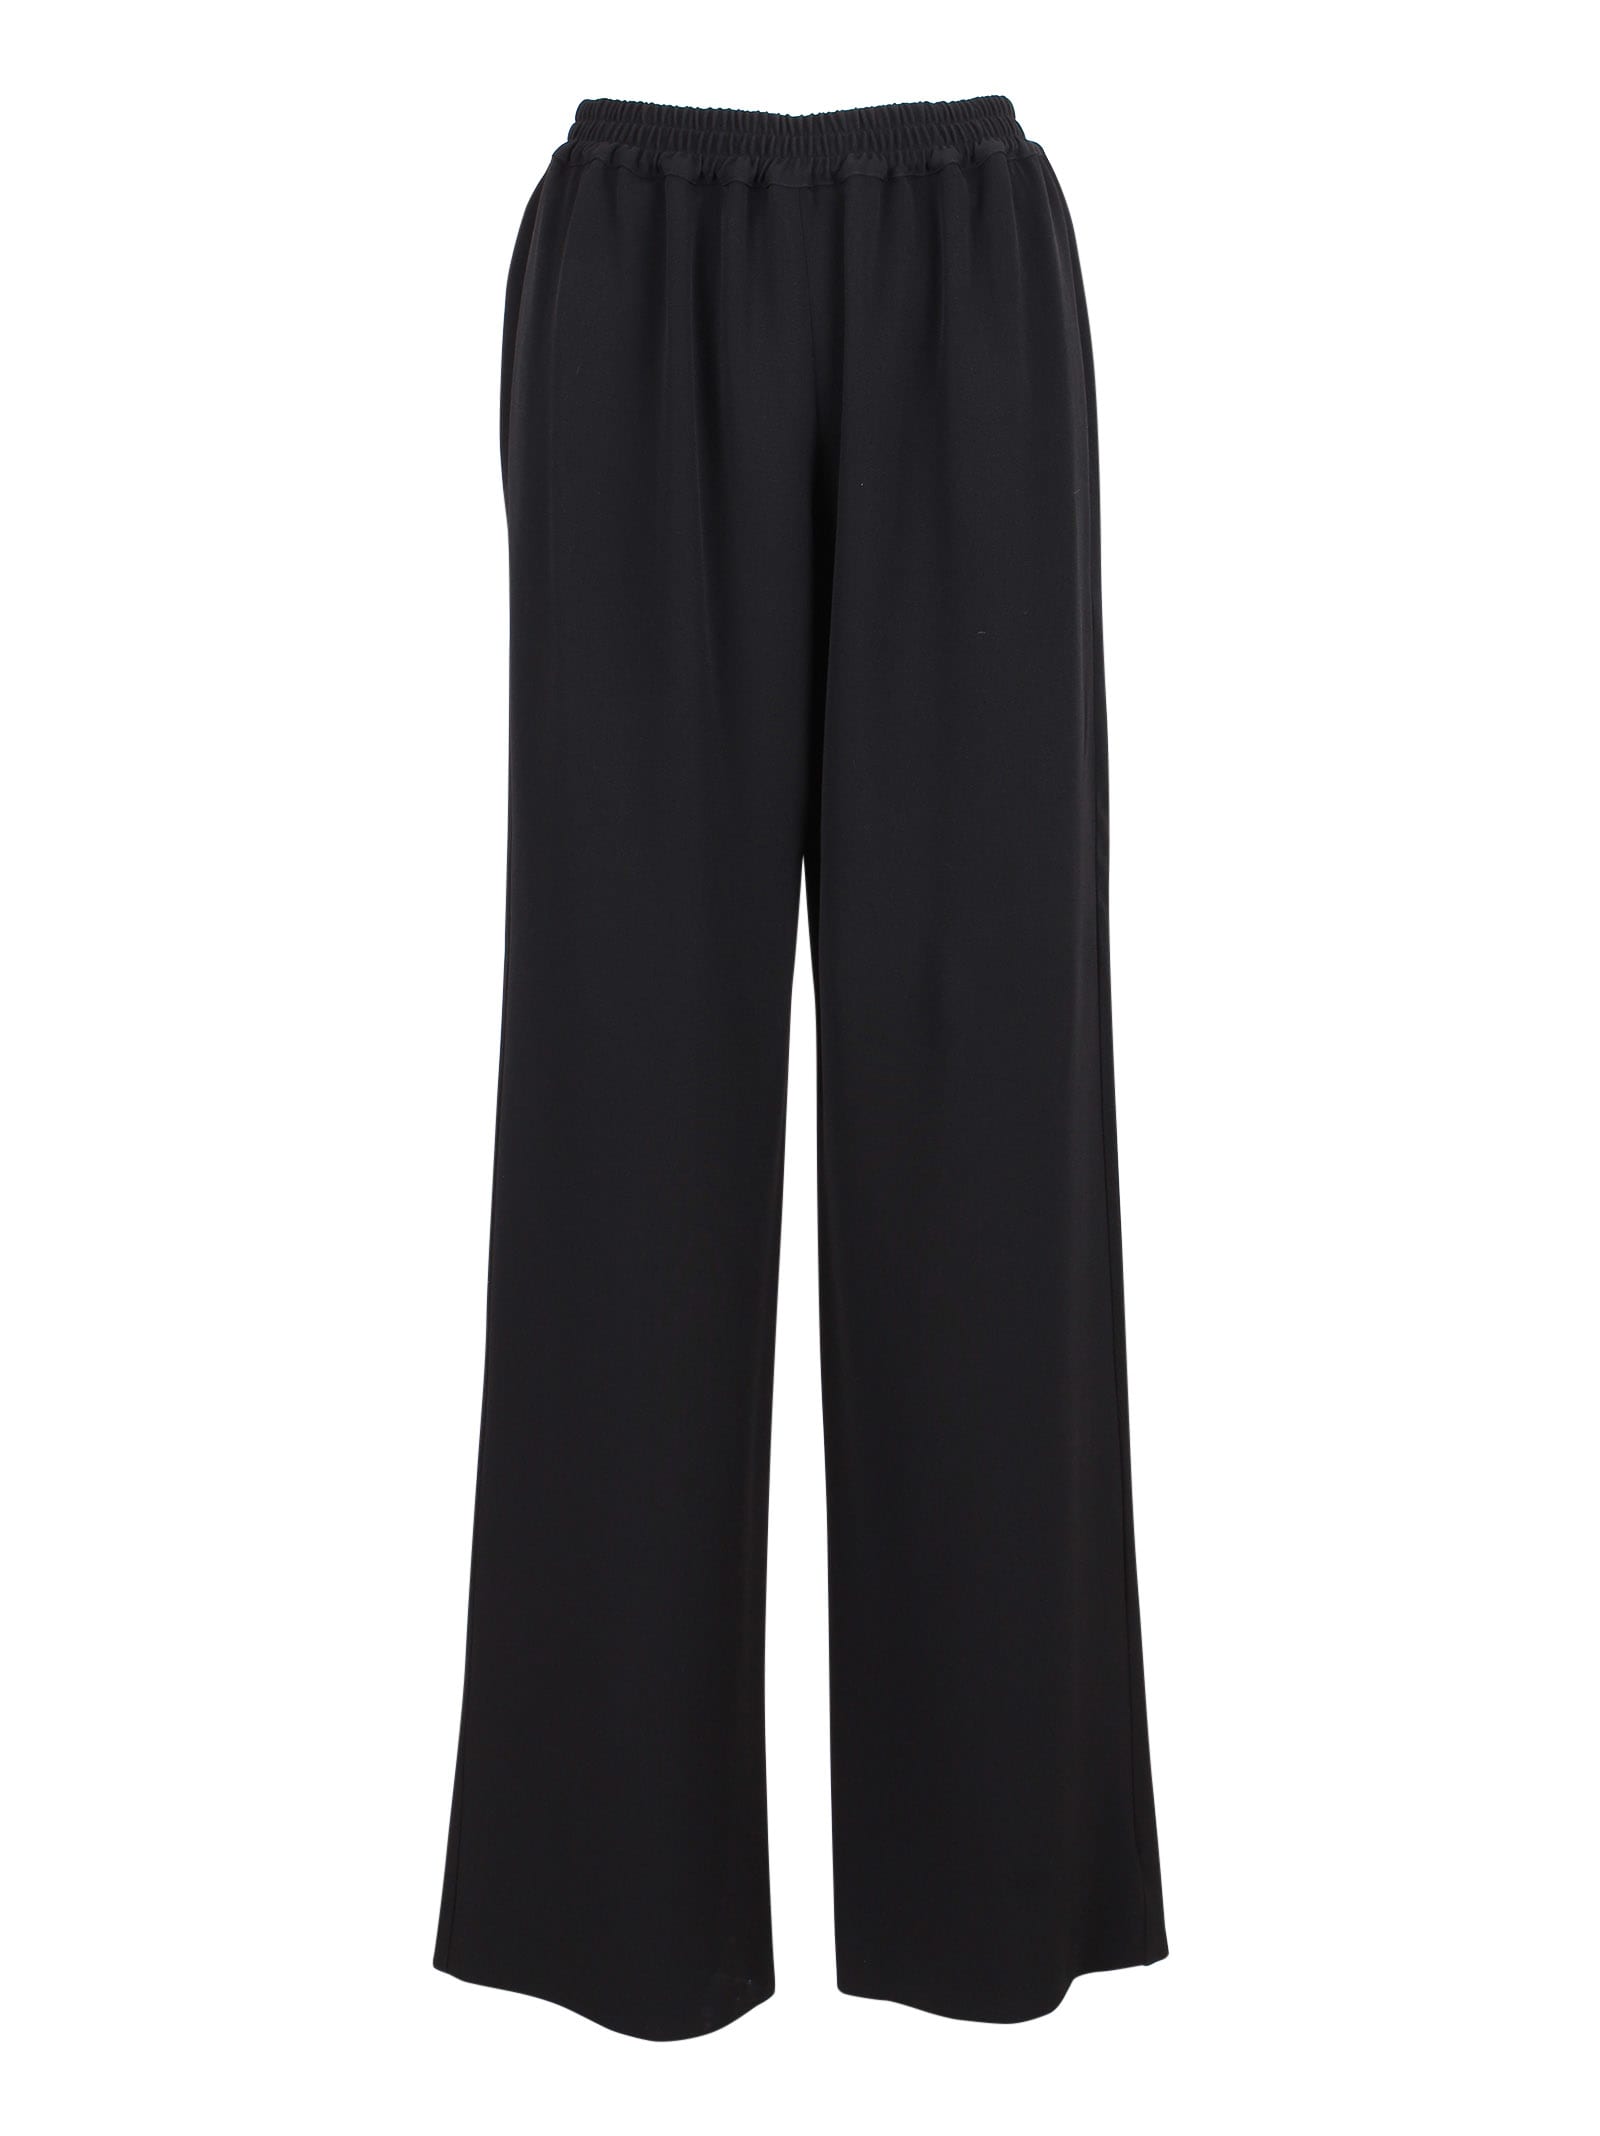 Gianluca Capannolo Acrylic Trousers